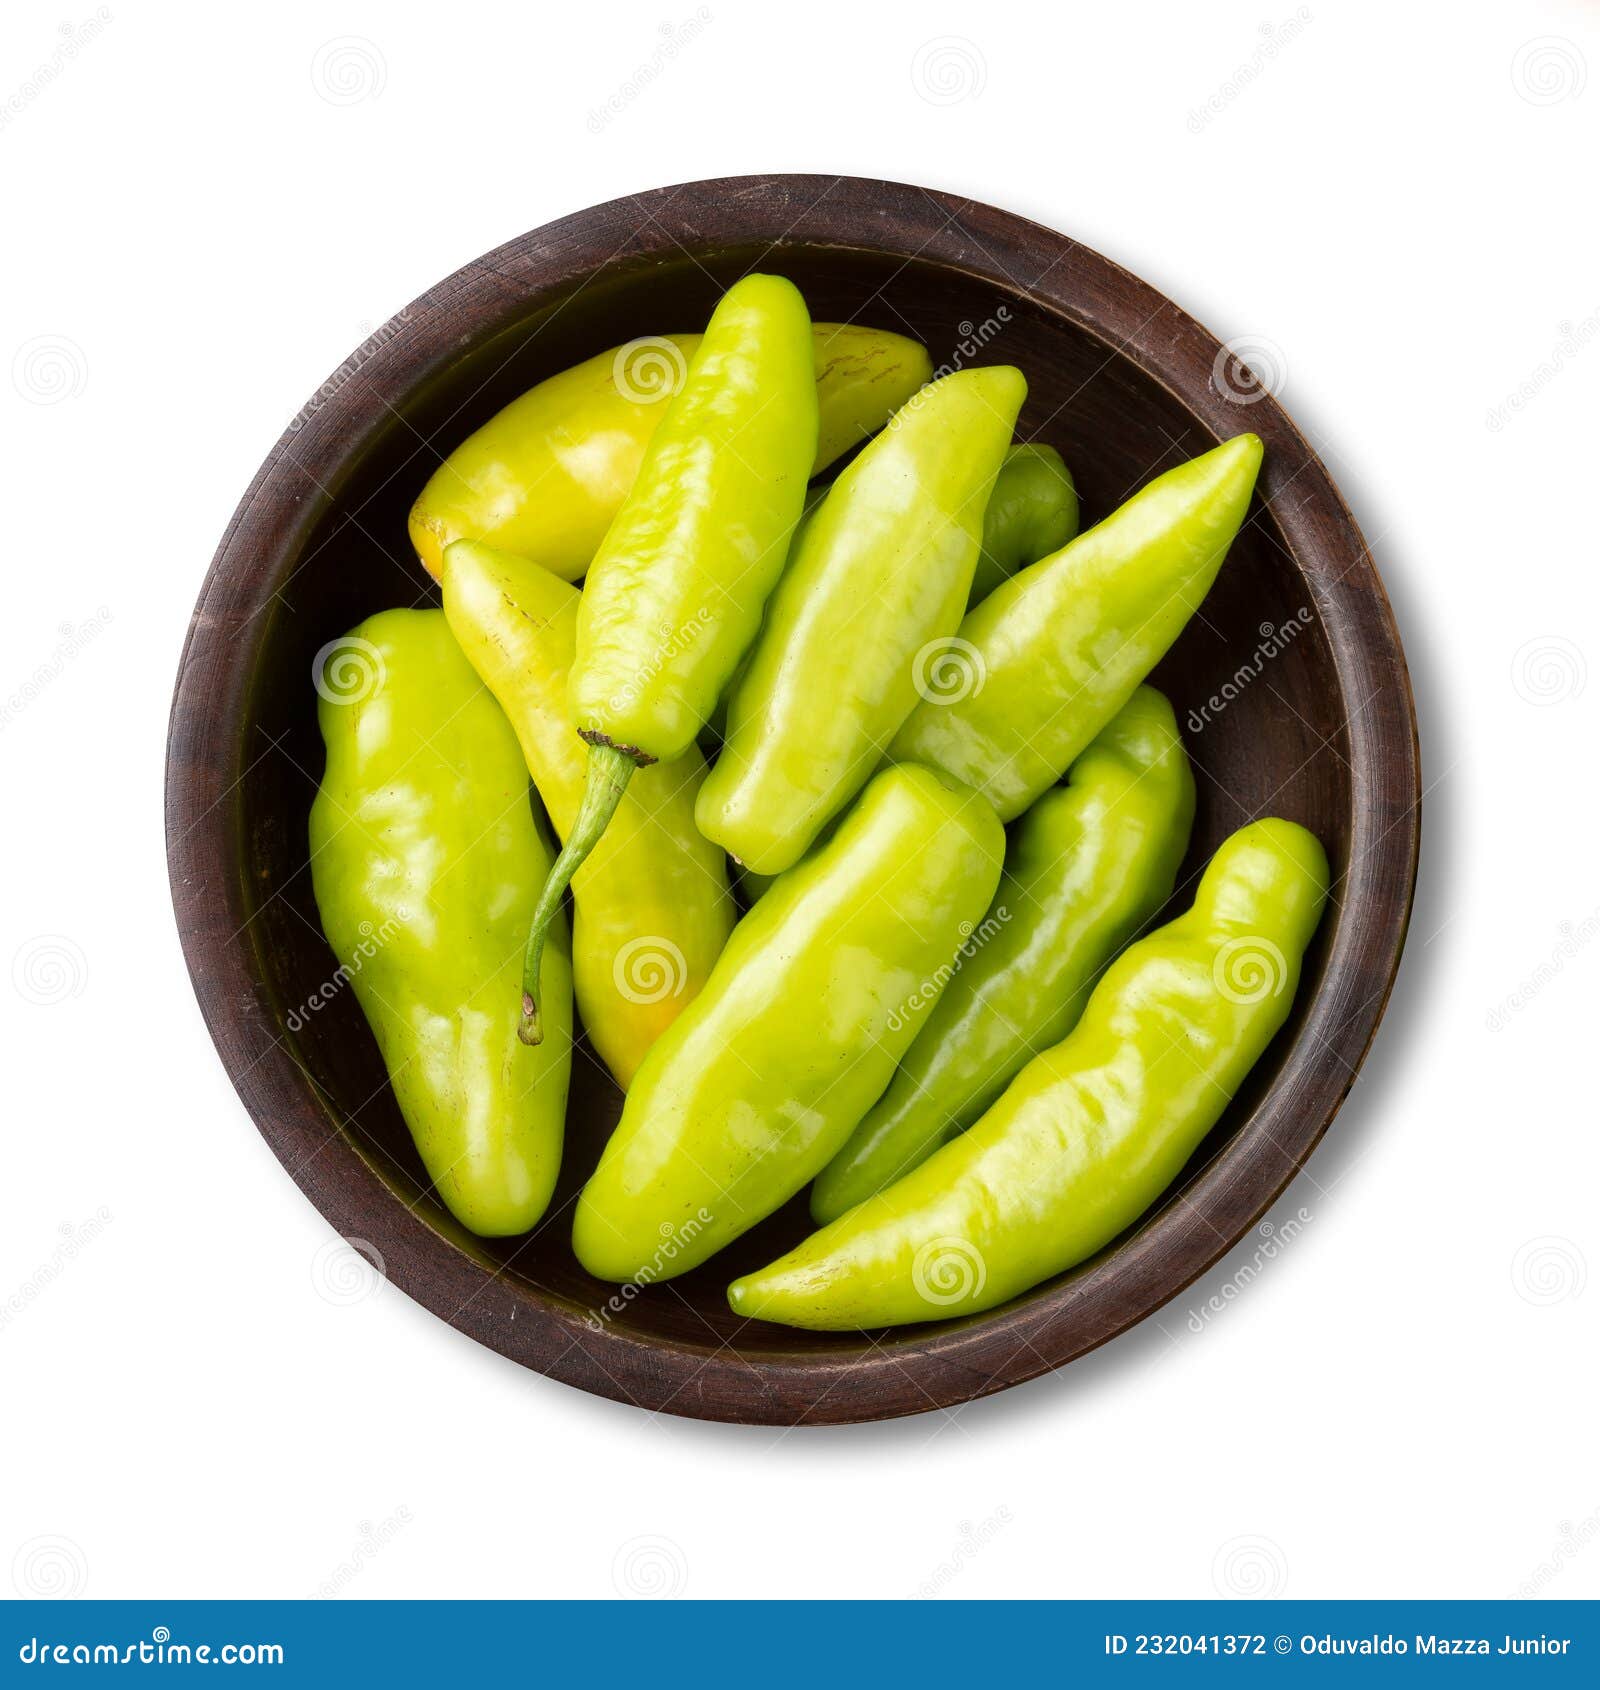 green cheiro scent/smell pepper on a bowl  over white background